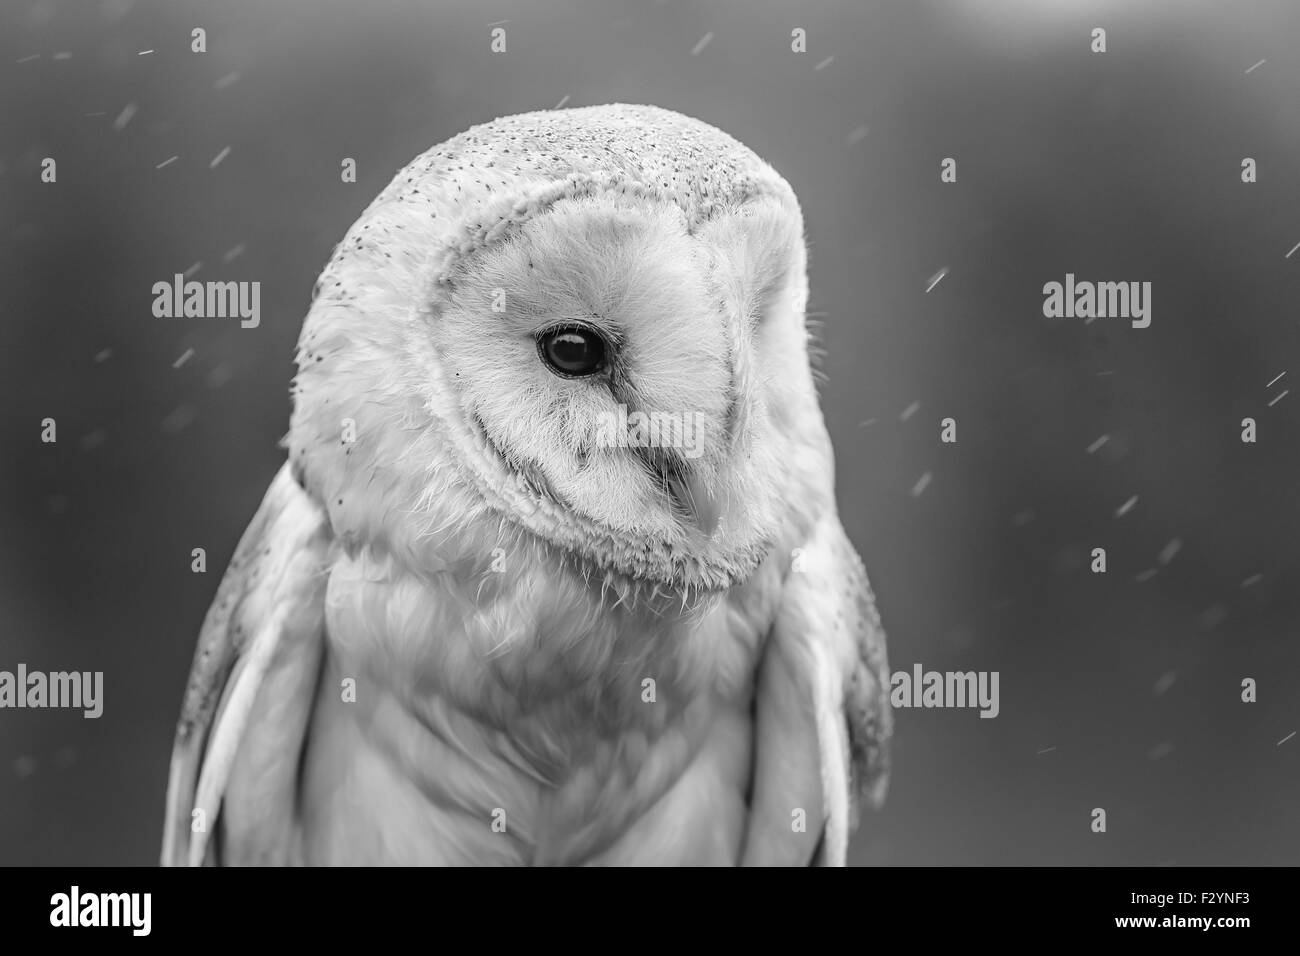 A close up photograph of a barn owl produced in black and white utilising a shallow depth of field. Stock Photo